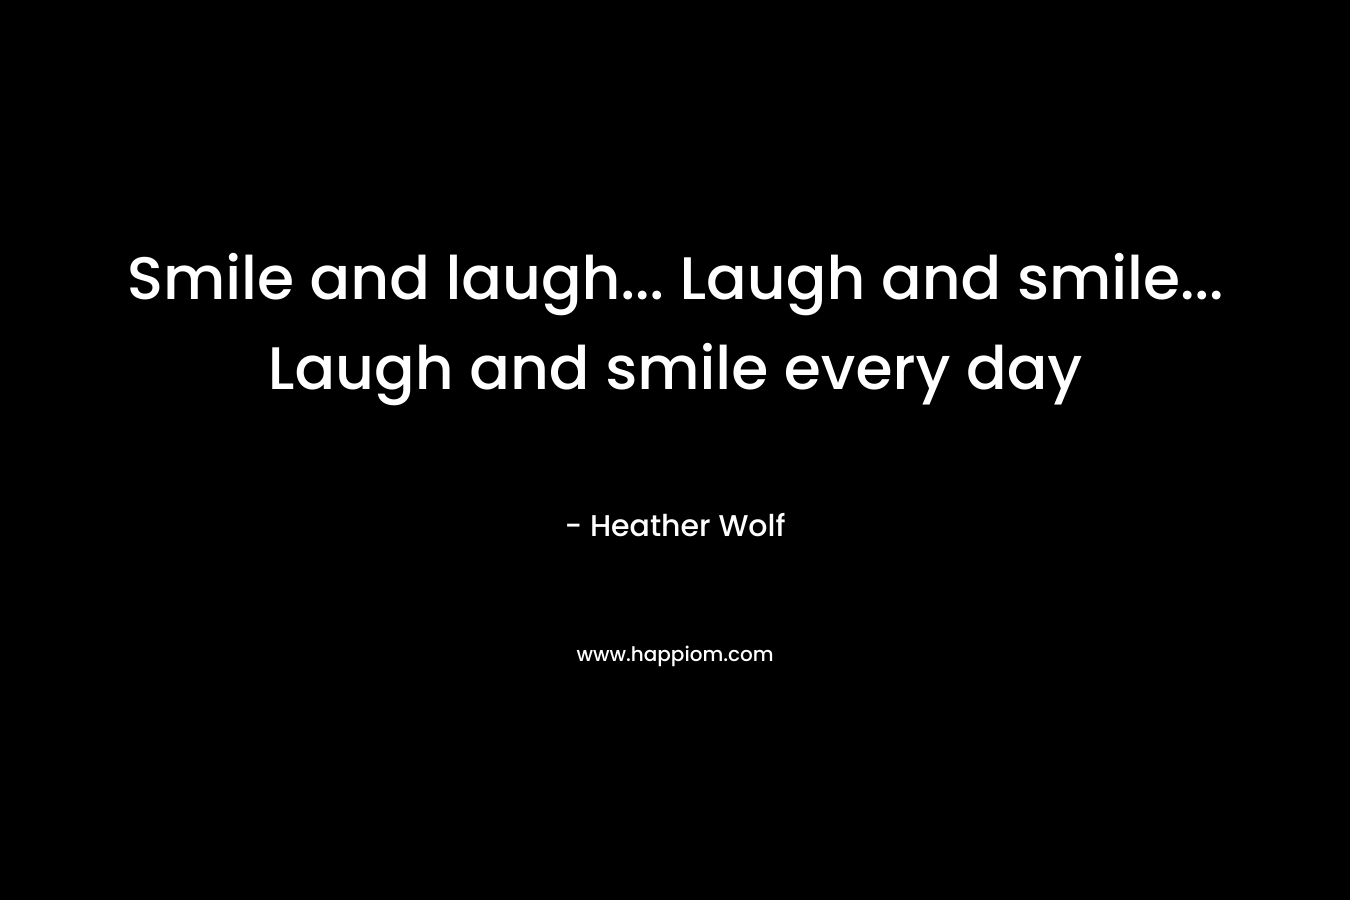 Smile and laugh... Laugh and smile... Laugh and smile every day